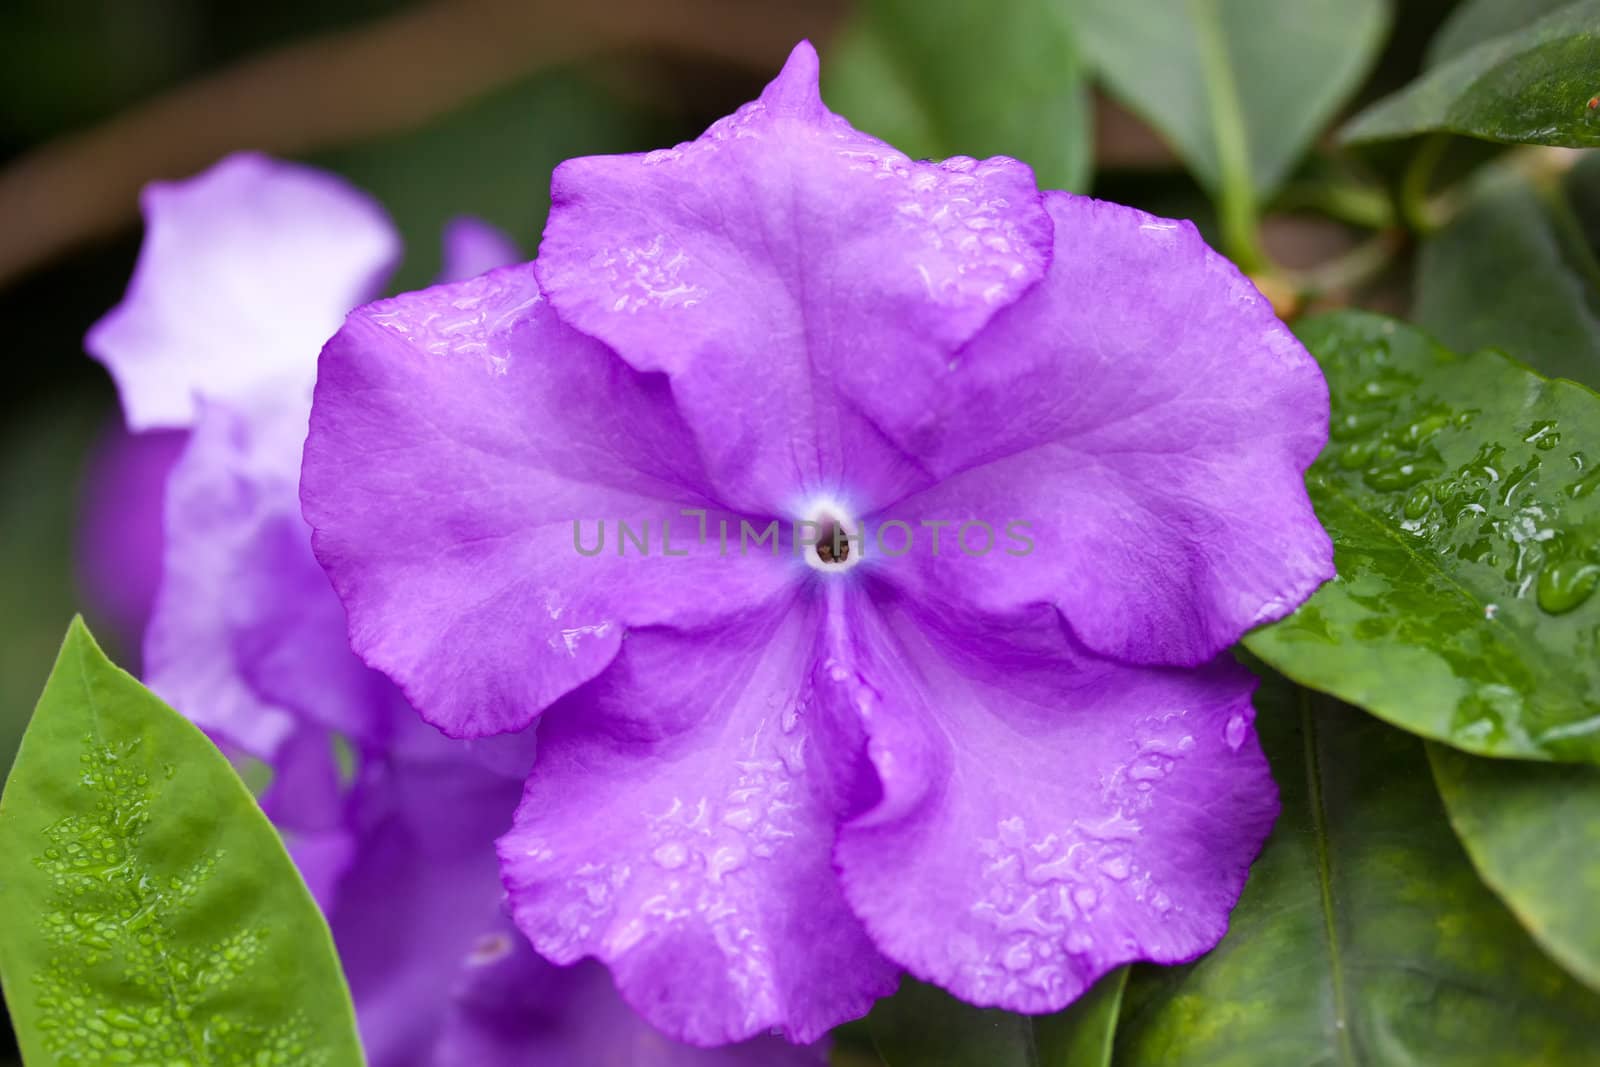 Violet flower on the background of leaves